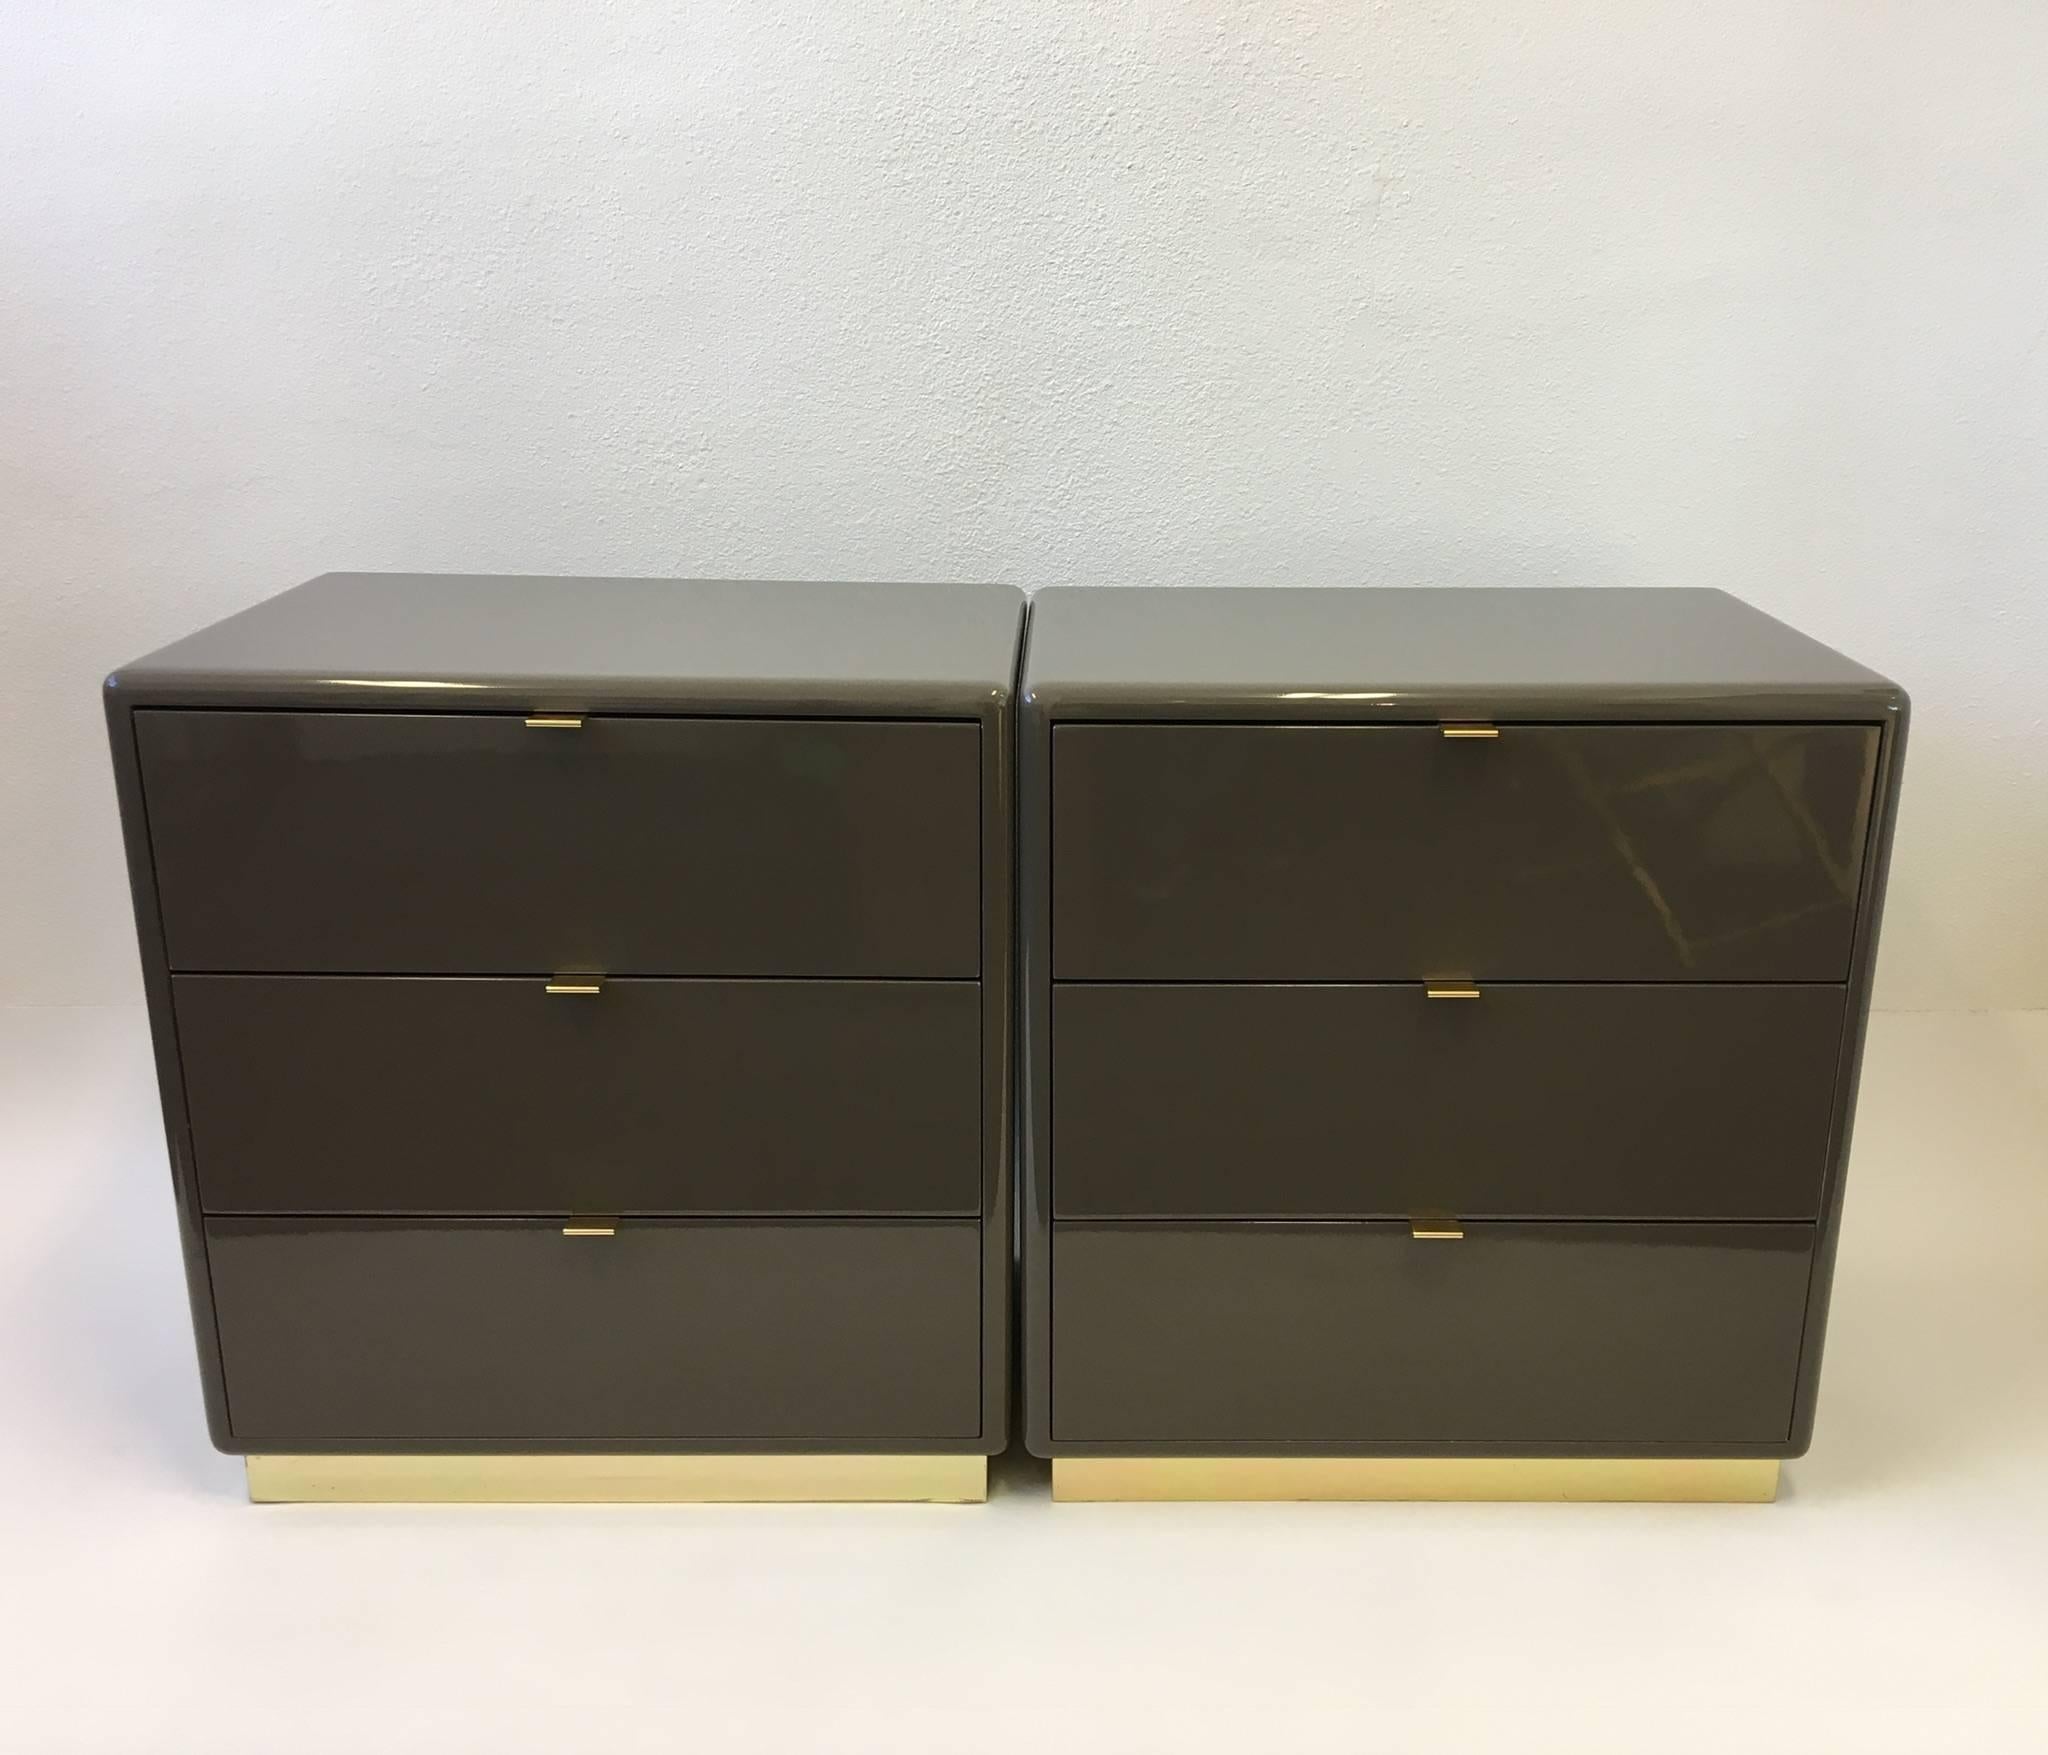 American Pair of Light Brown Lacquer and Brass Nightstands by Steve Chase